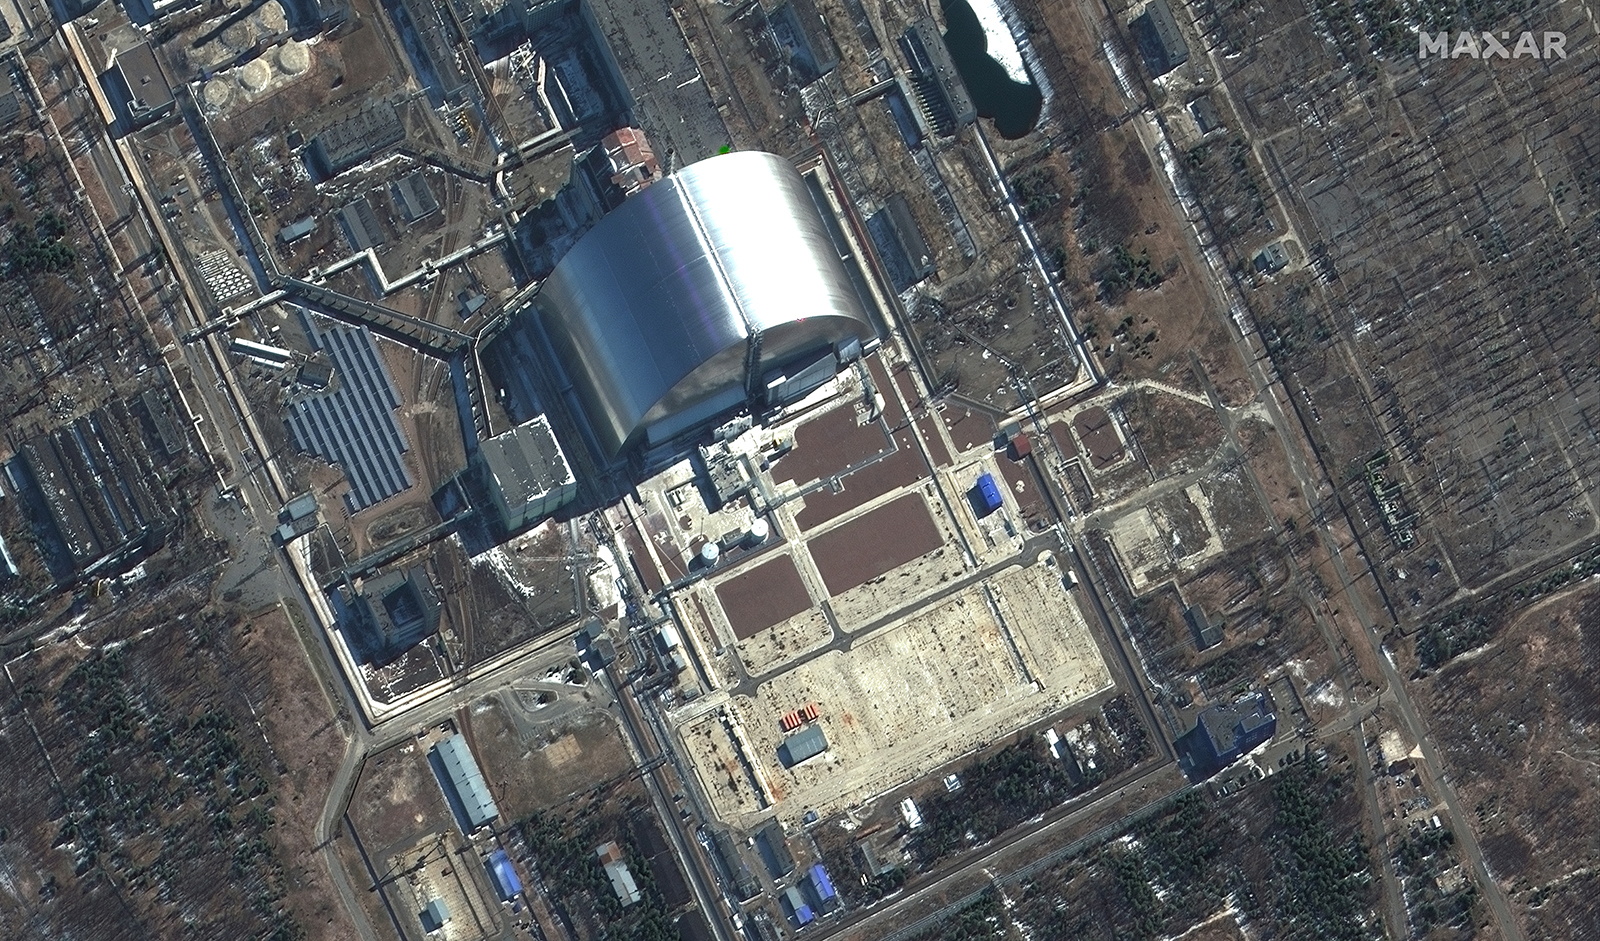 Chernobyl nuclear power plant seen from above on March 10 in Ukraine.